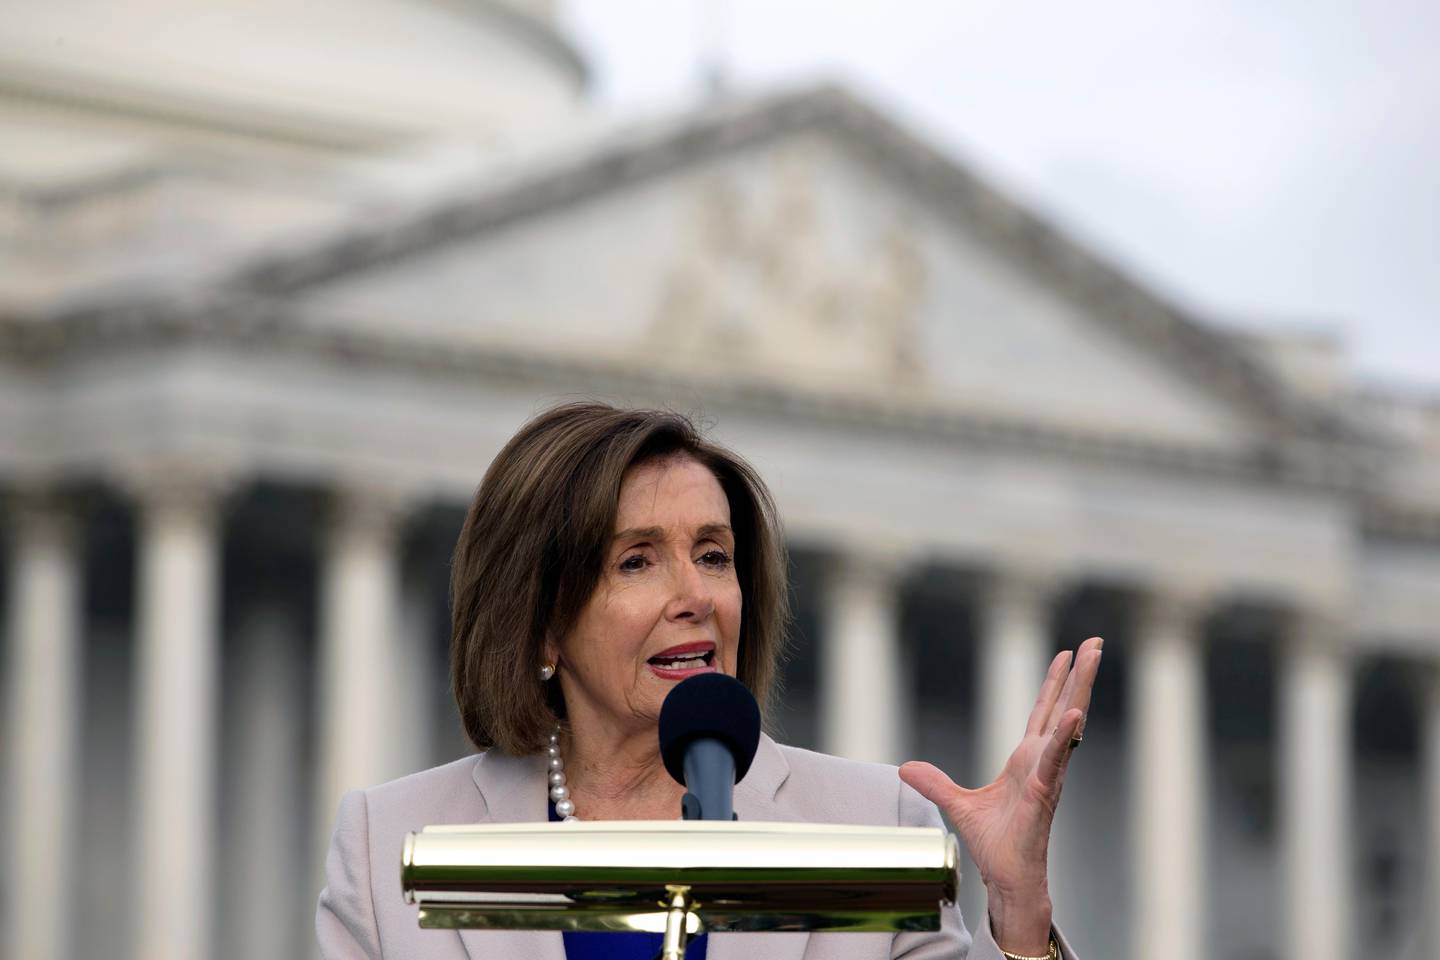 Speaker of the House Nancy Pelosi, D-Calif., speaks during the planting of a commemorative tree in honor of the former President Theodore Roosevelt on the grounds of the U.S. Capitol in Washington, on Wednesday, Oct. 30, 2019. (AP Photo/Jose Luis Magana)